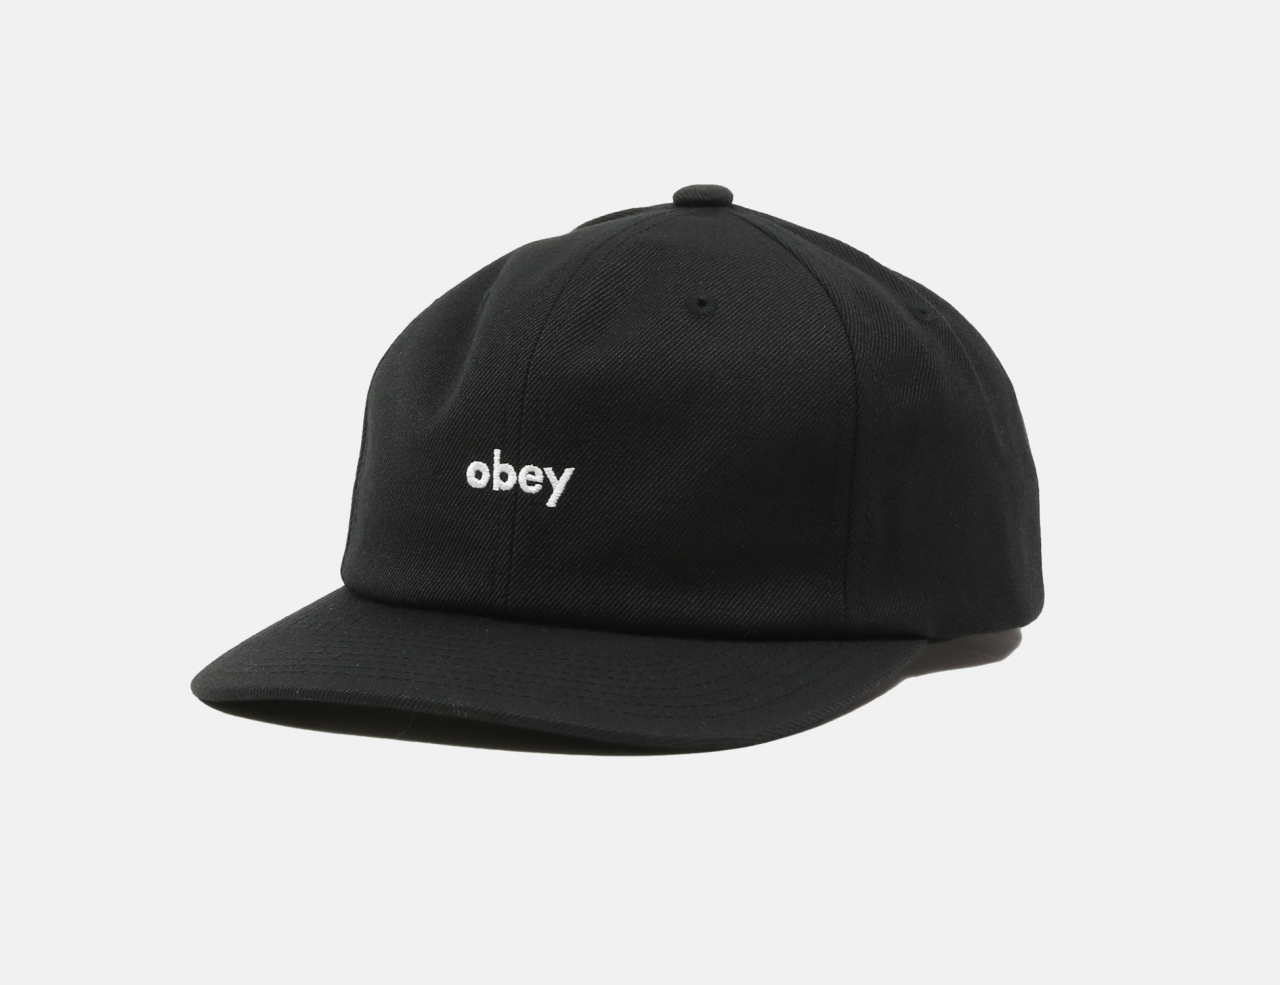 Obey Lowercase 6 Panel Classic Snapback - Black